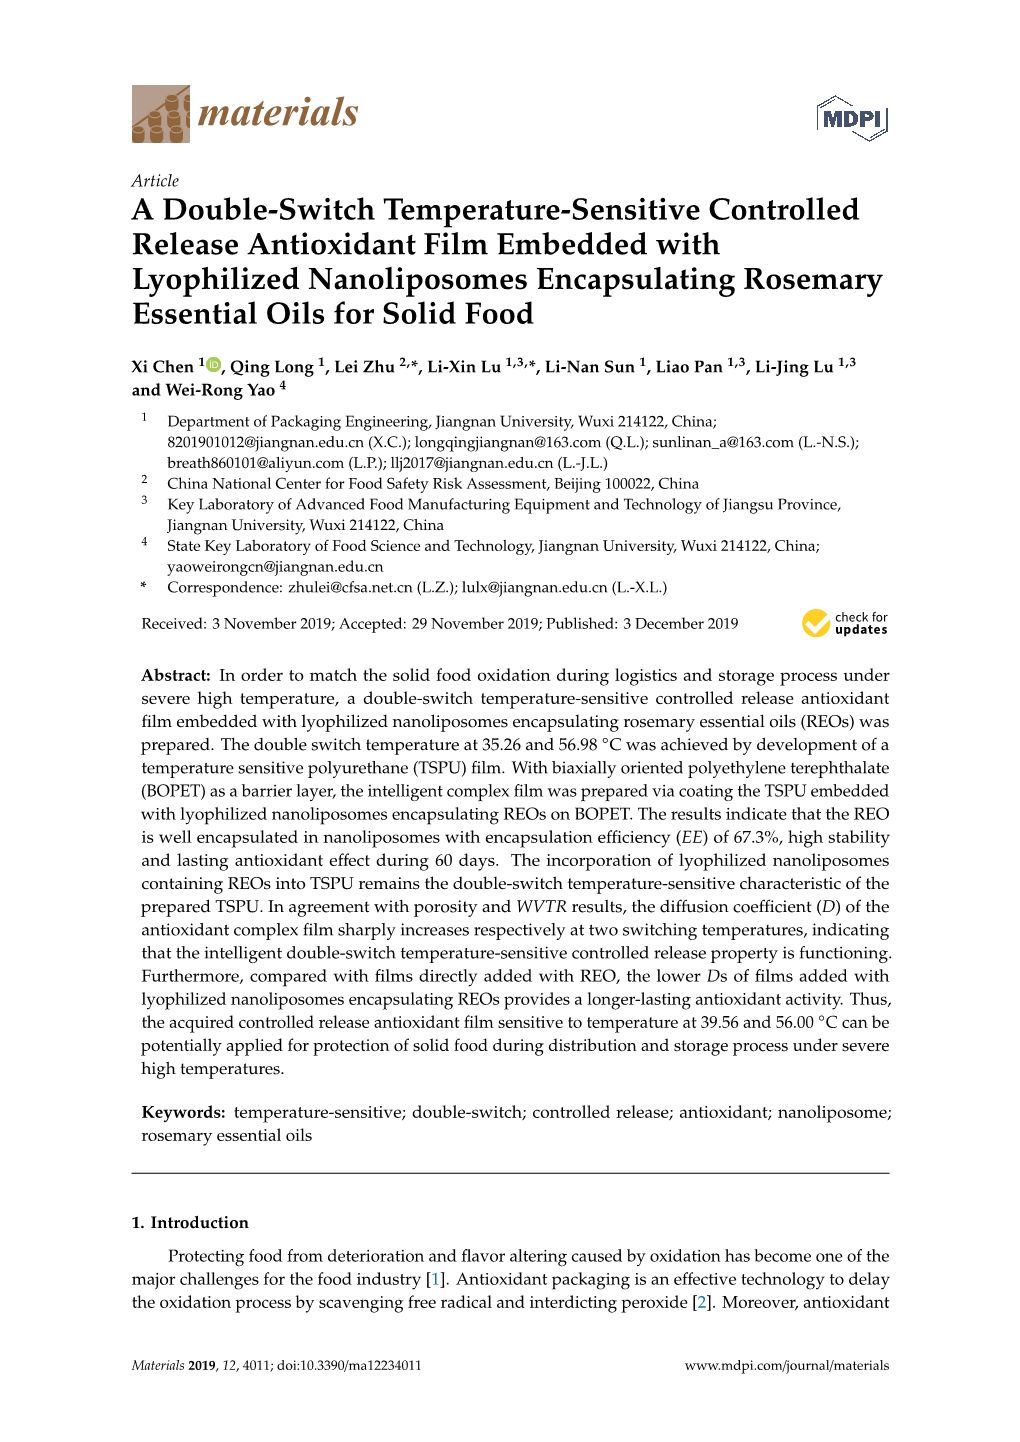 A Double-Switch Temperature-Sensitive Controlled Release Antioxidant Film Embedded with Lyophilized Nanoliposomes Encapsulating Rosemary Essential Oils for Solid Food